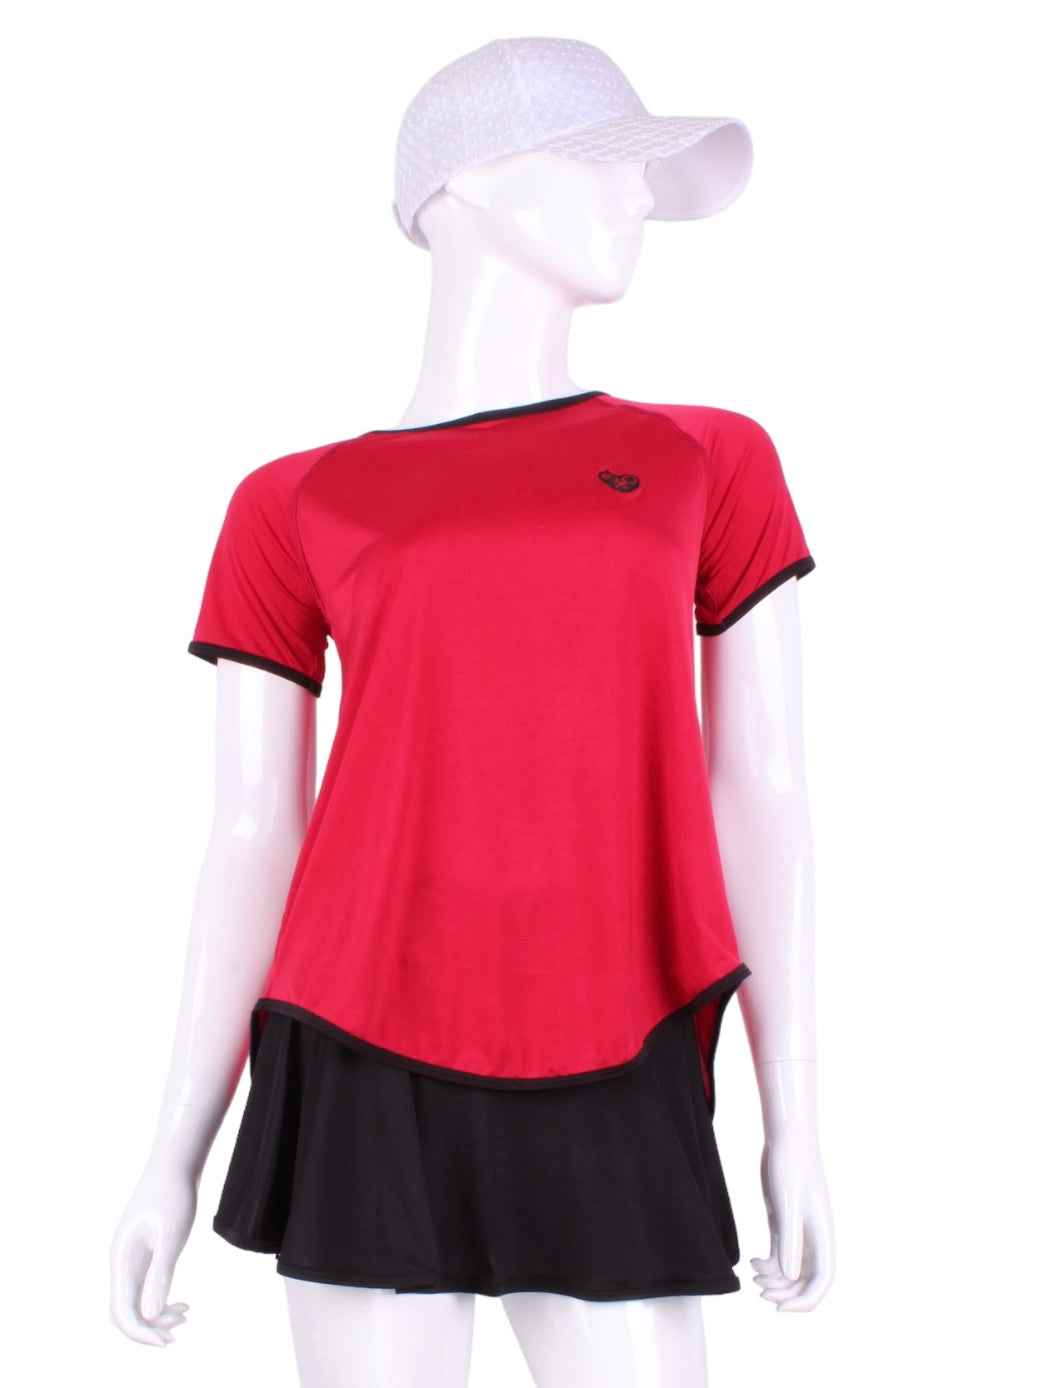 Tie Back Tee Short Sleeve Red. This is our limited edition Tie Back Short Sleeve Top in gorgeous Red Color.  This piece has a silky and soft fabric.   We make these in very small quantities - by design.  Unique.  Luxurious.  Comfortable.  Cool.  Fun.